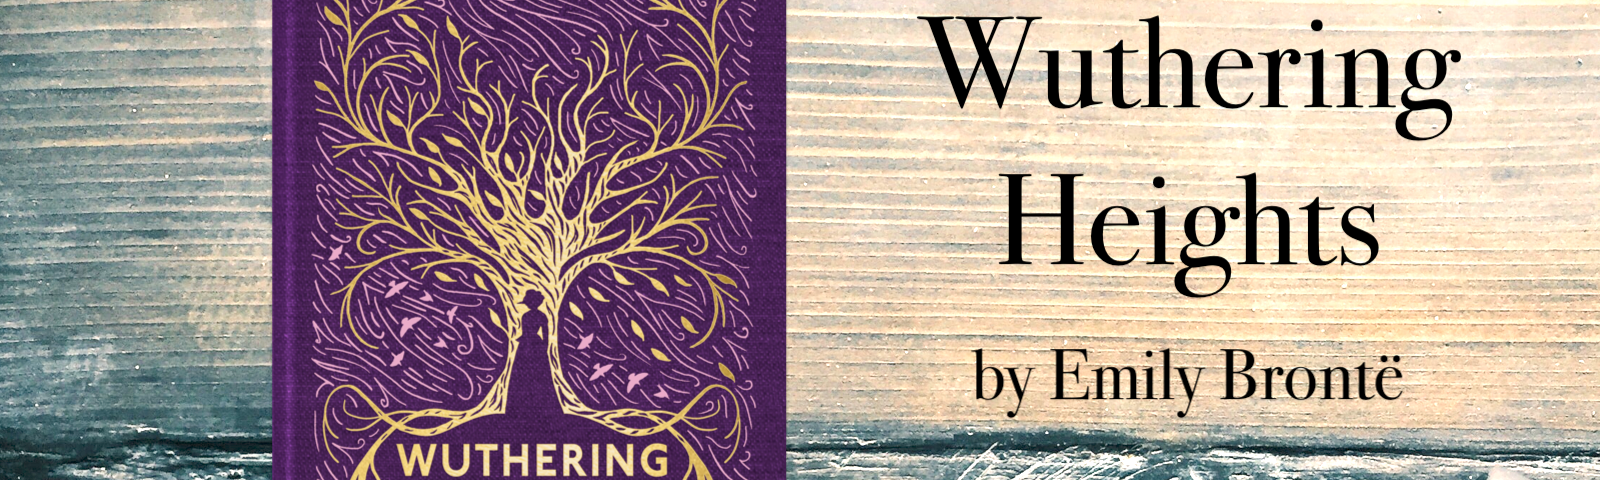 Eleventy-One Book Review of Wuthering Heights by Emily Brontë